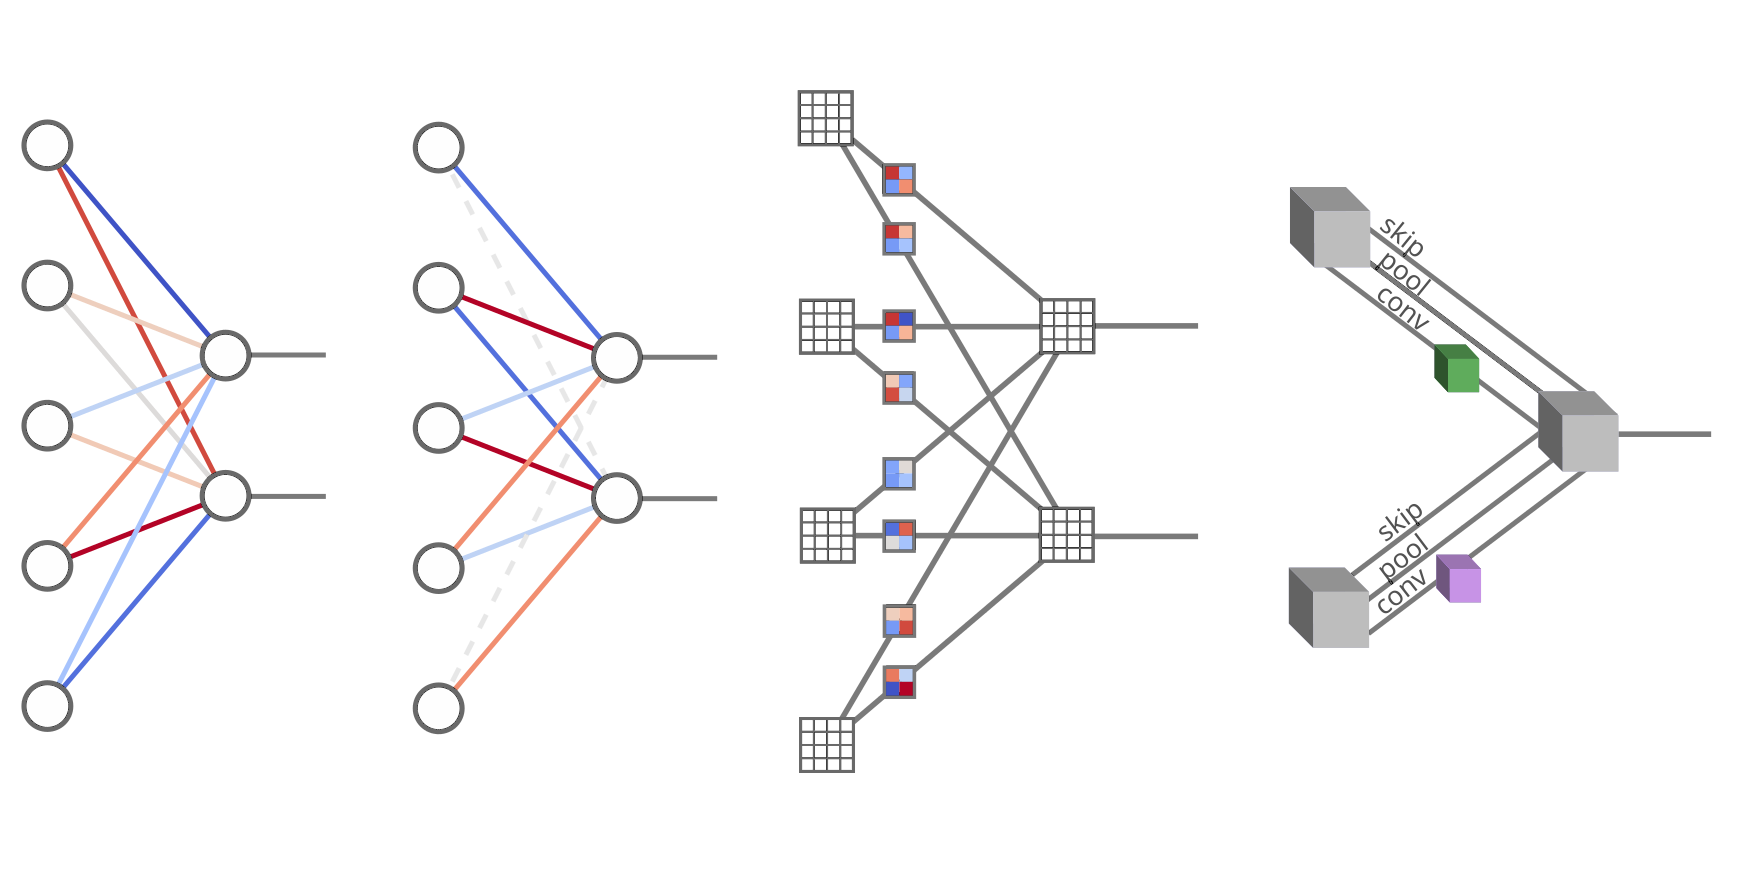 Neuron representations (Adapted from a Maile et al. (2022))